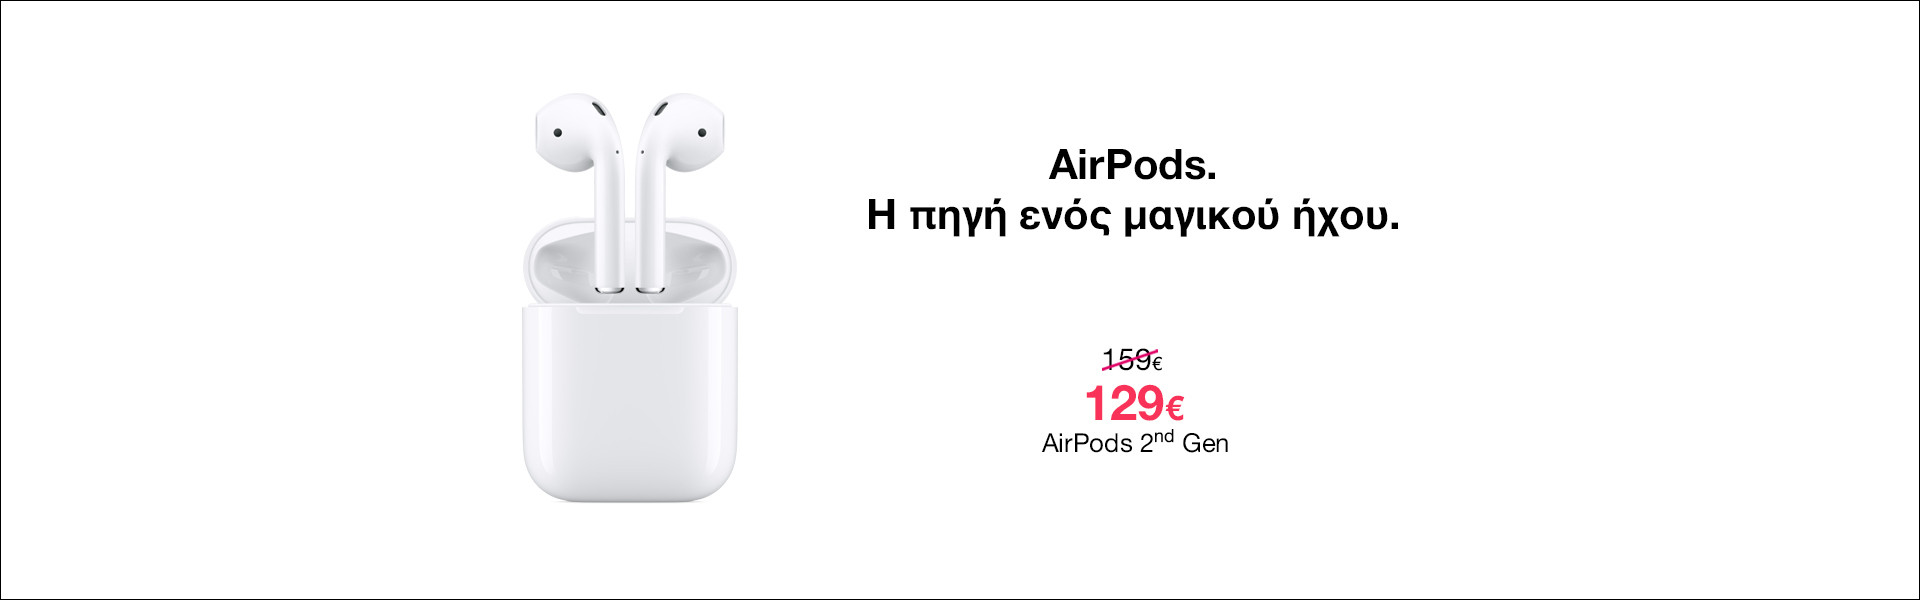 Screen Landing Apple AirPods 2 Campaign